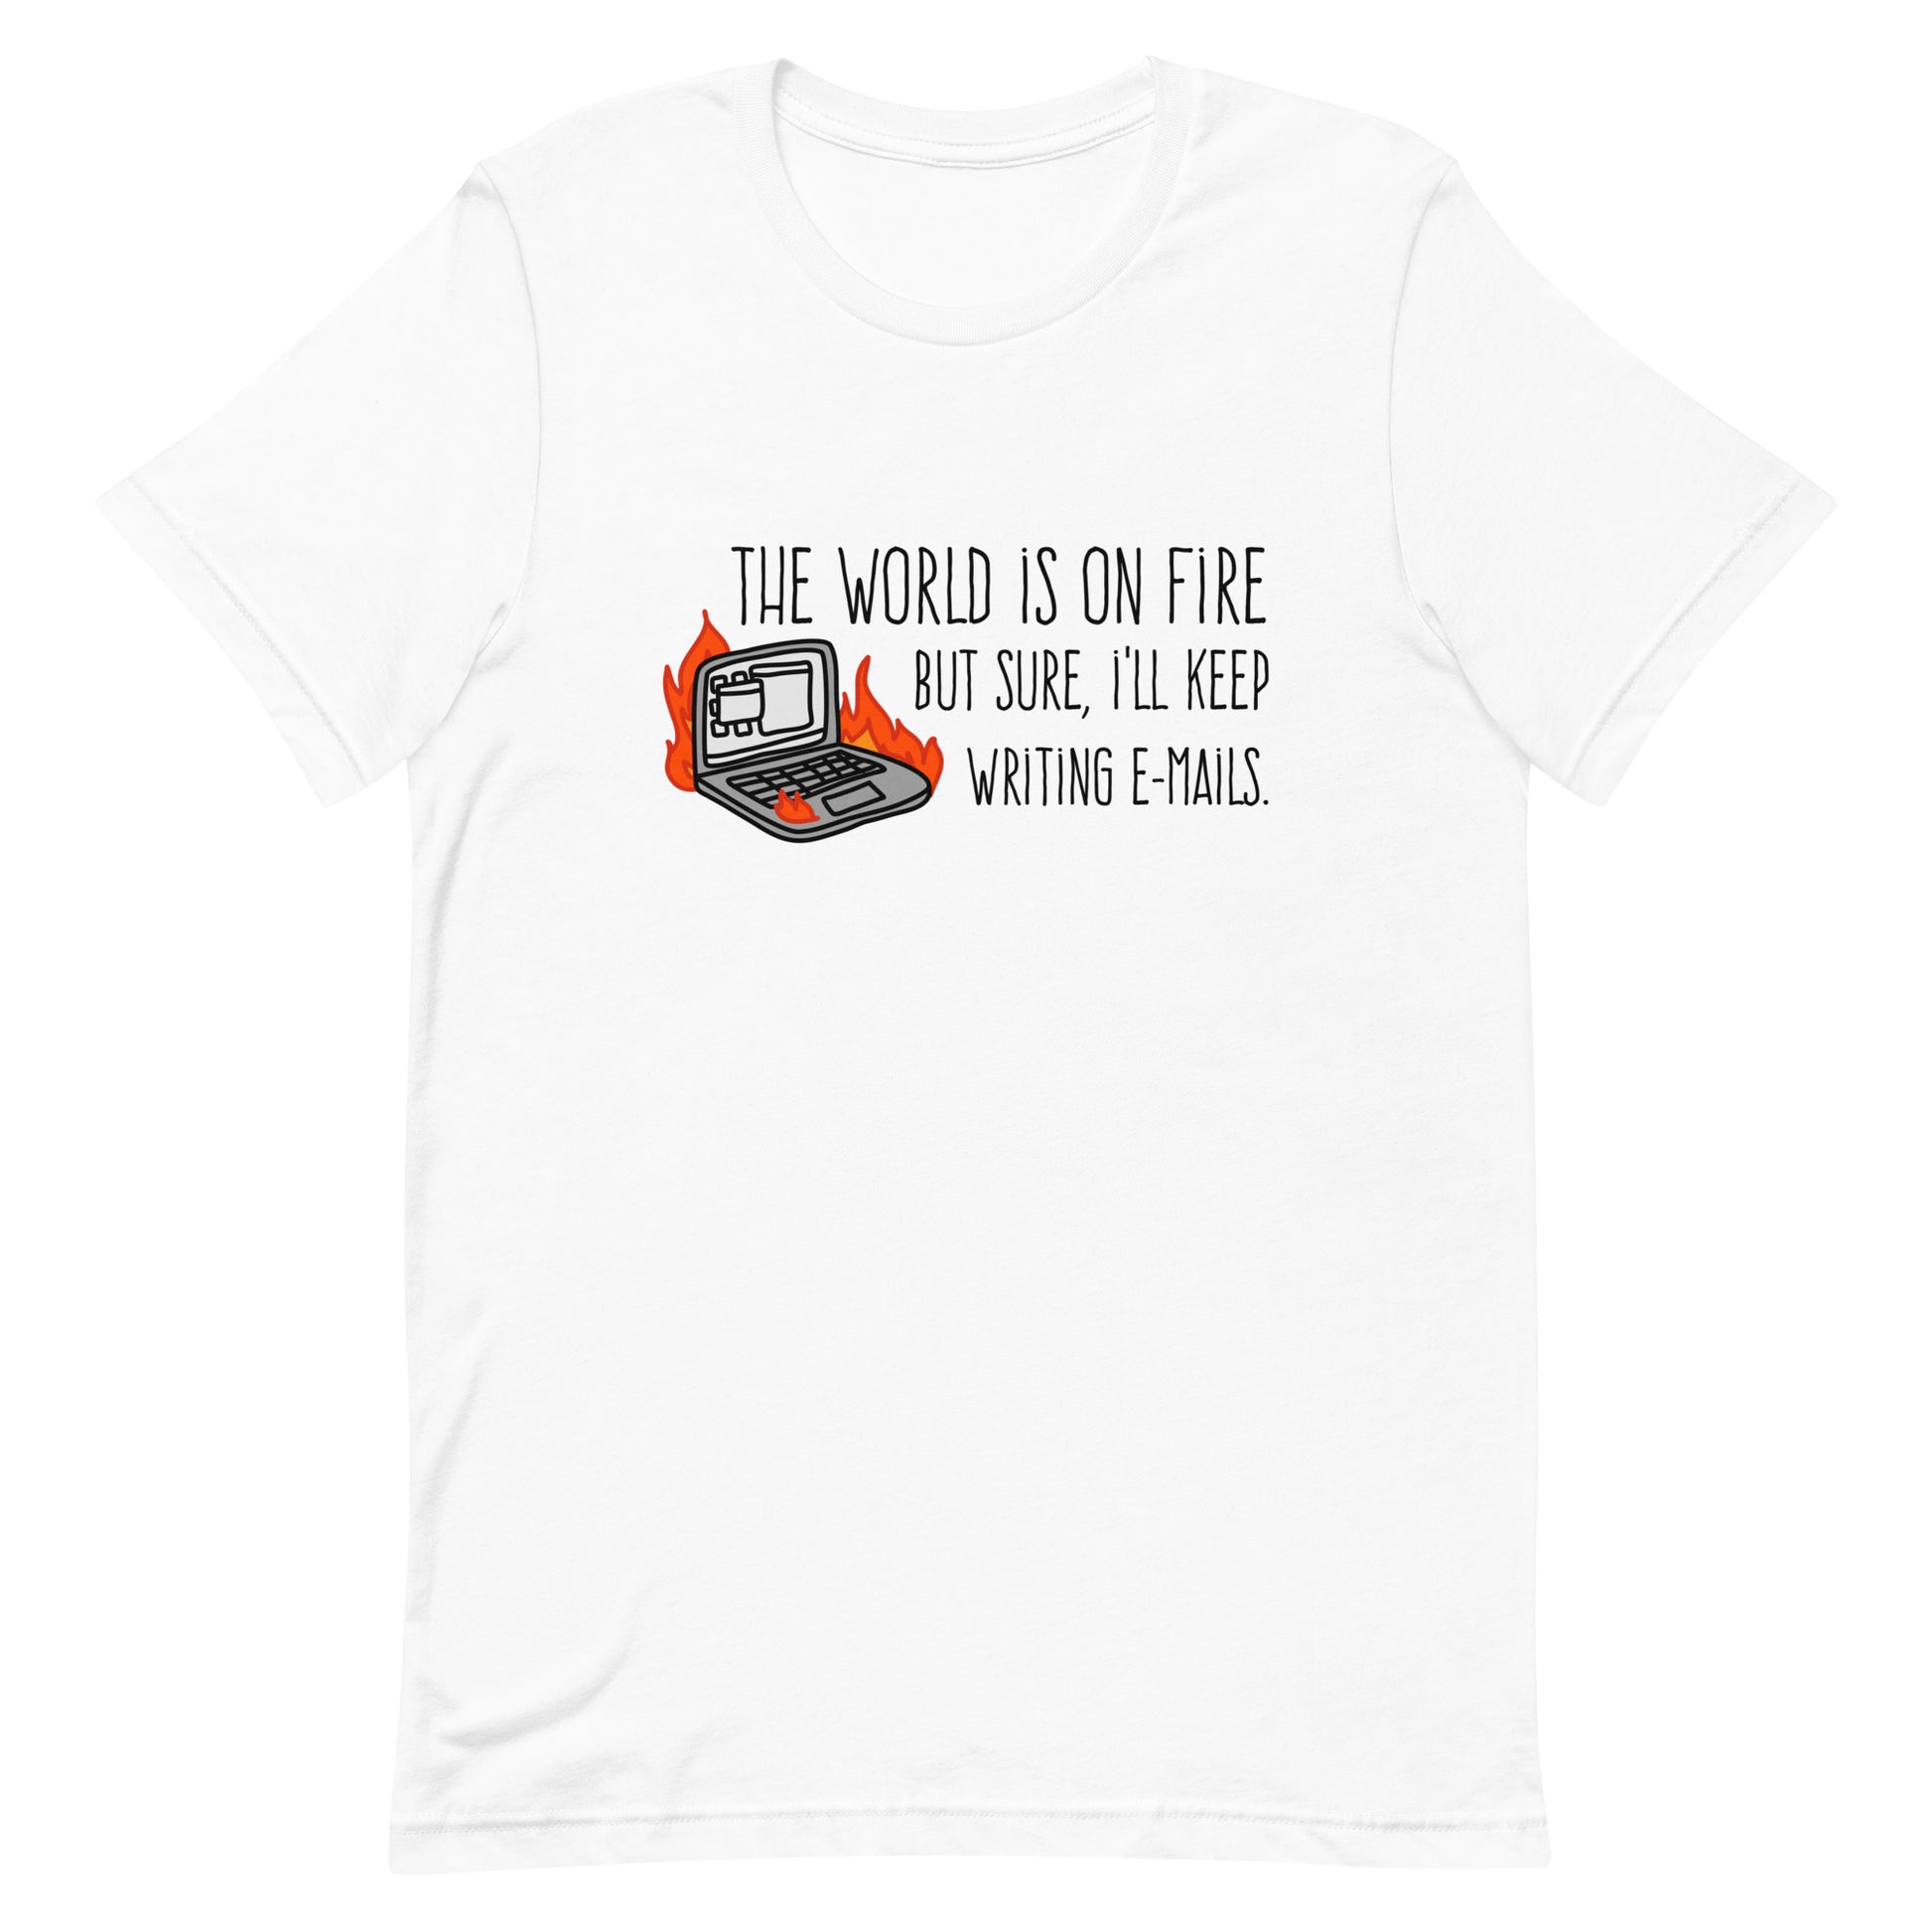 A white crewneck t-shirt featuring a squiggly illustration of a laptop that is on fire. Text alongside the laptop reads "the world is on fire but sure, I'll keep writing e-mails."